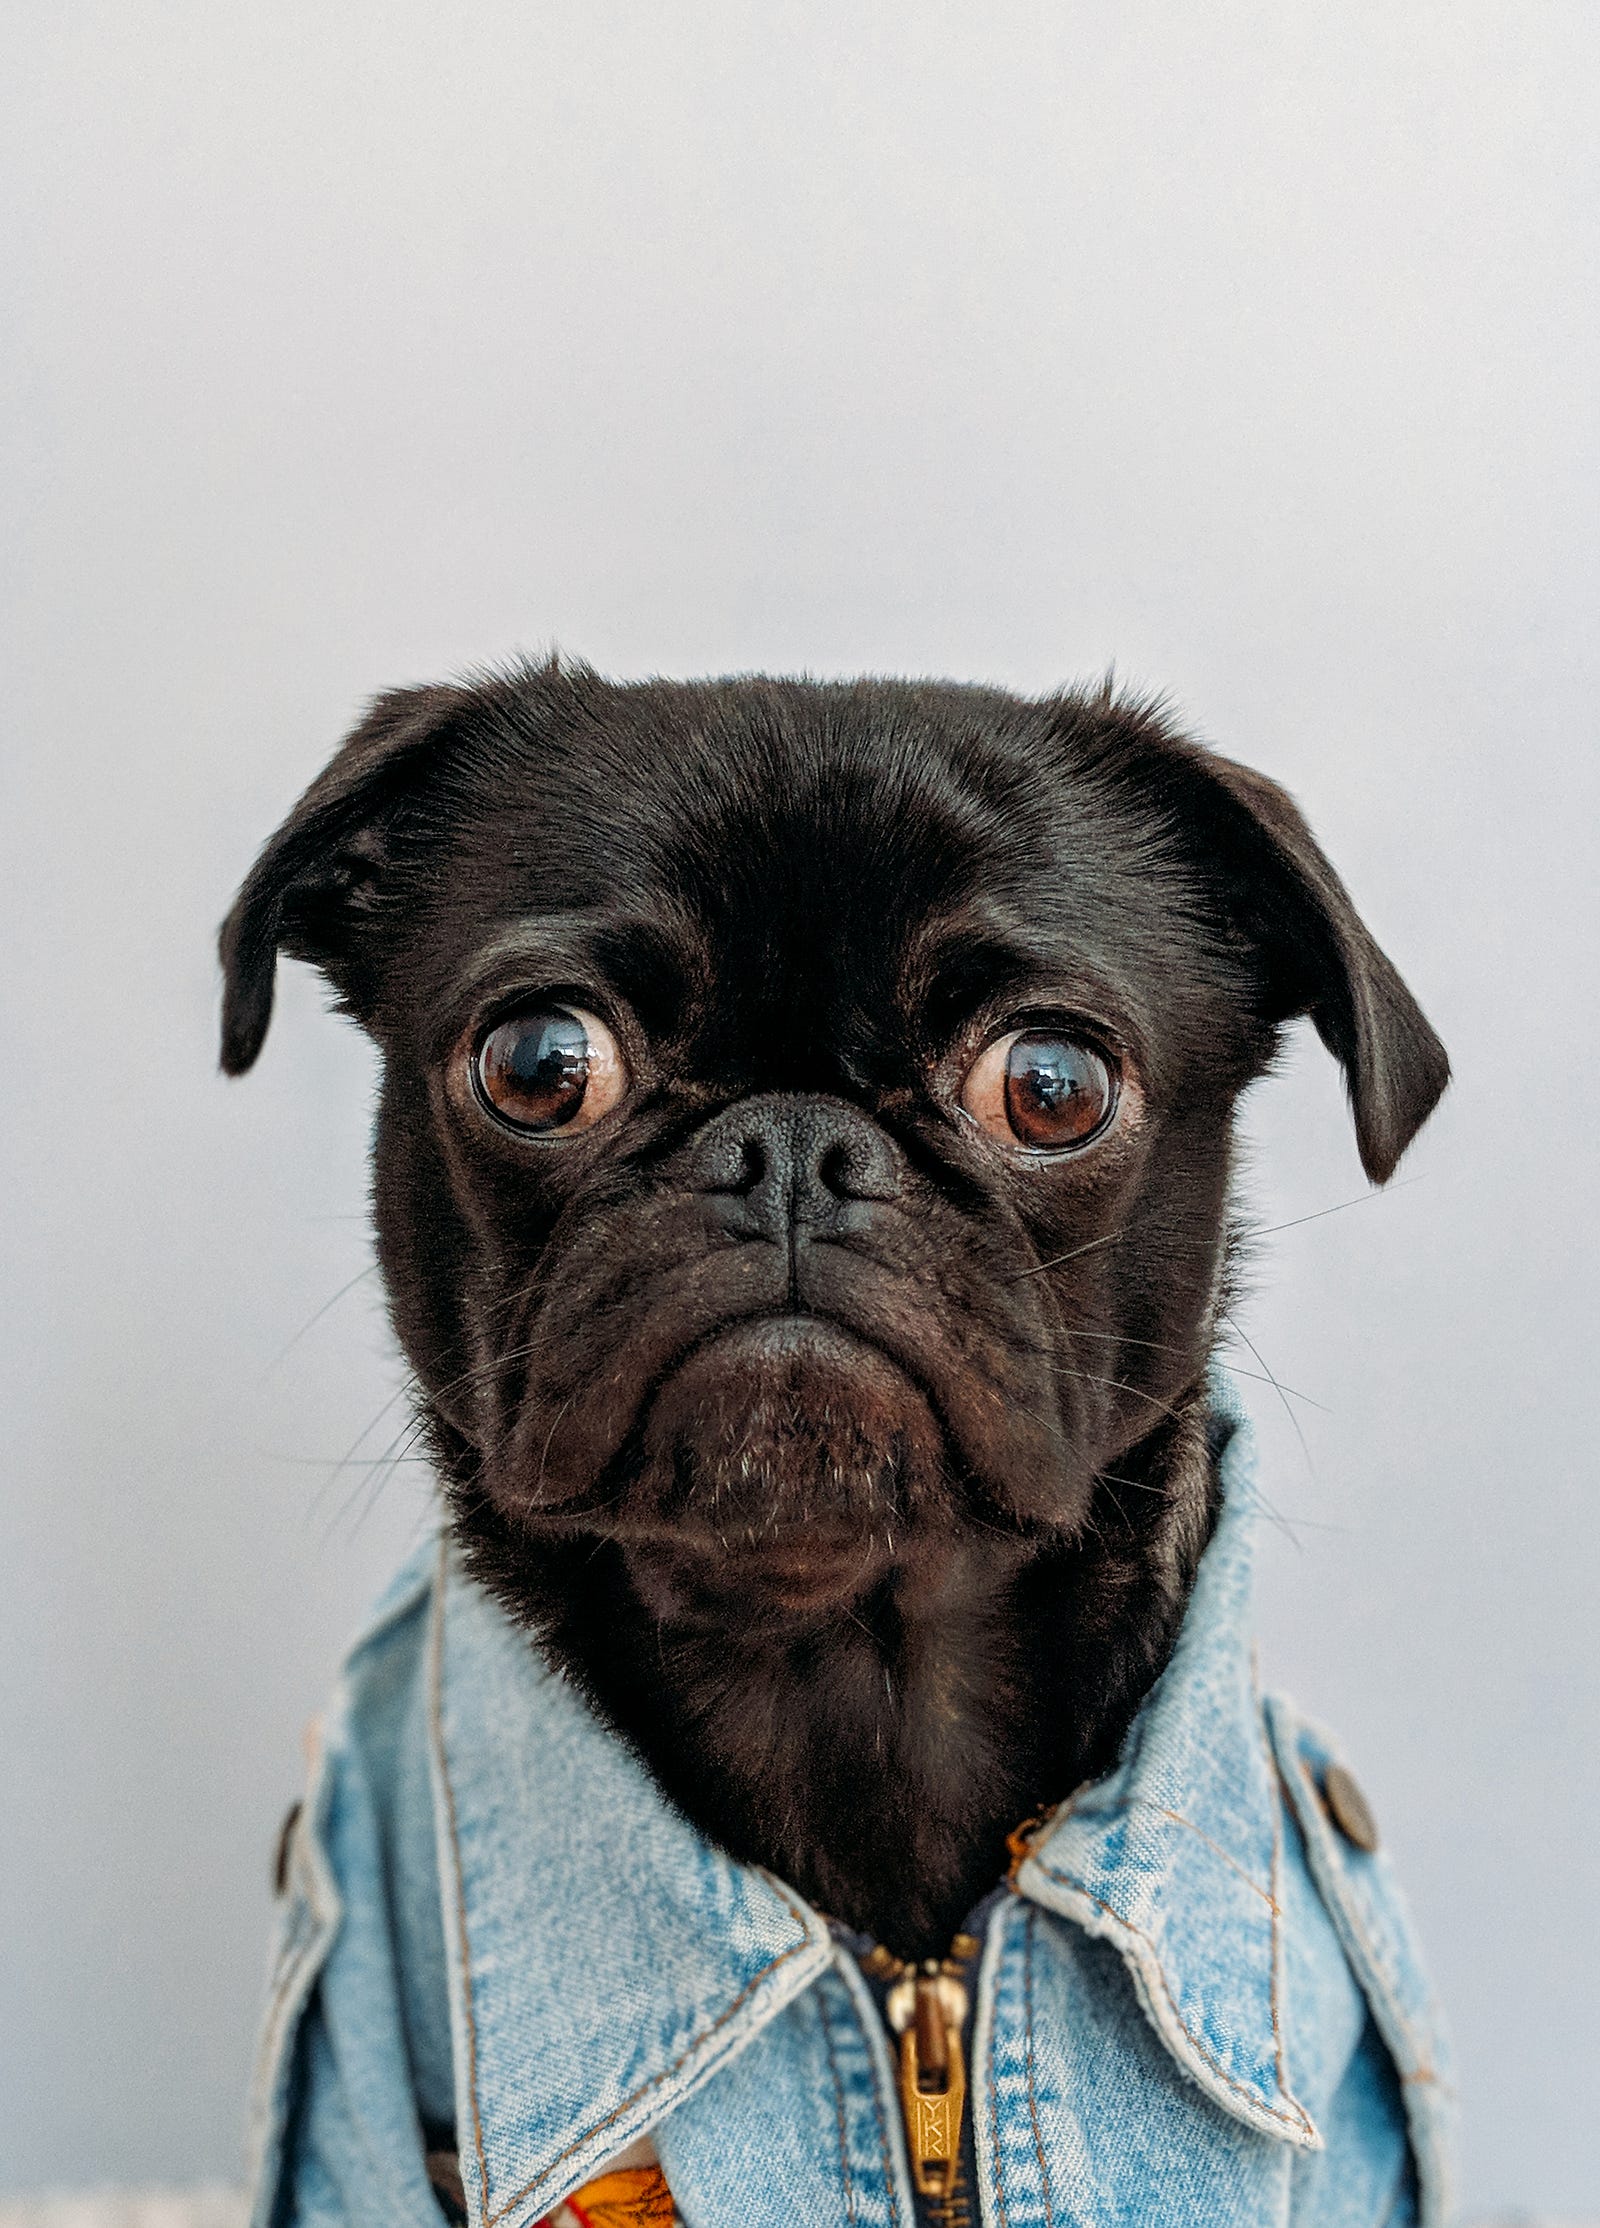 A dog (brown-colored pug) stares forward, eyes bulging. The dogs ears lean down. She wears a denim shirt. Light gray background.